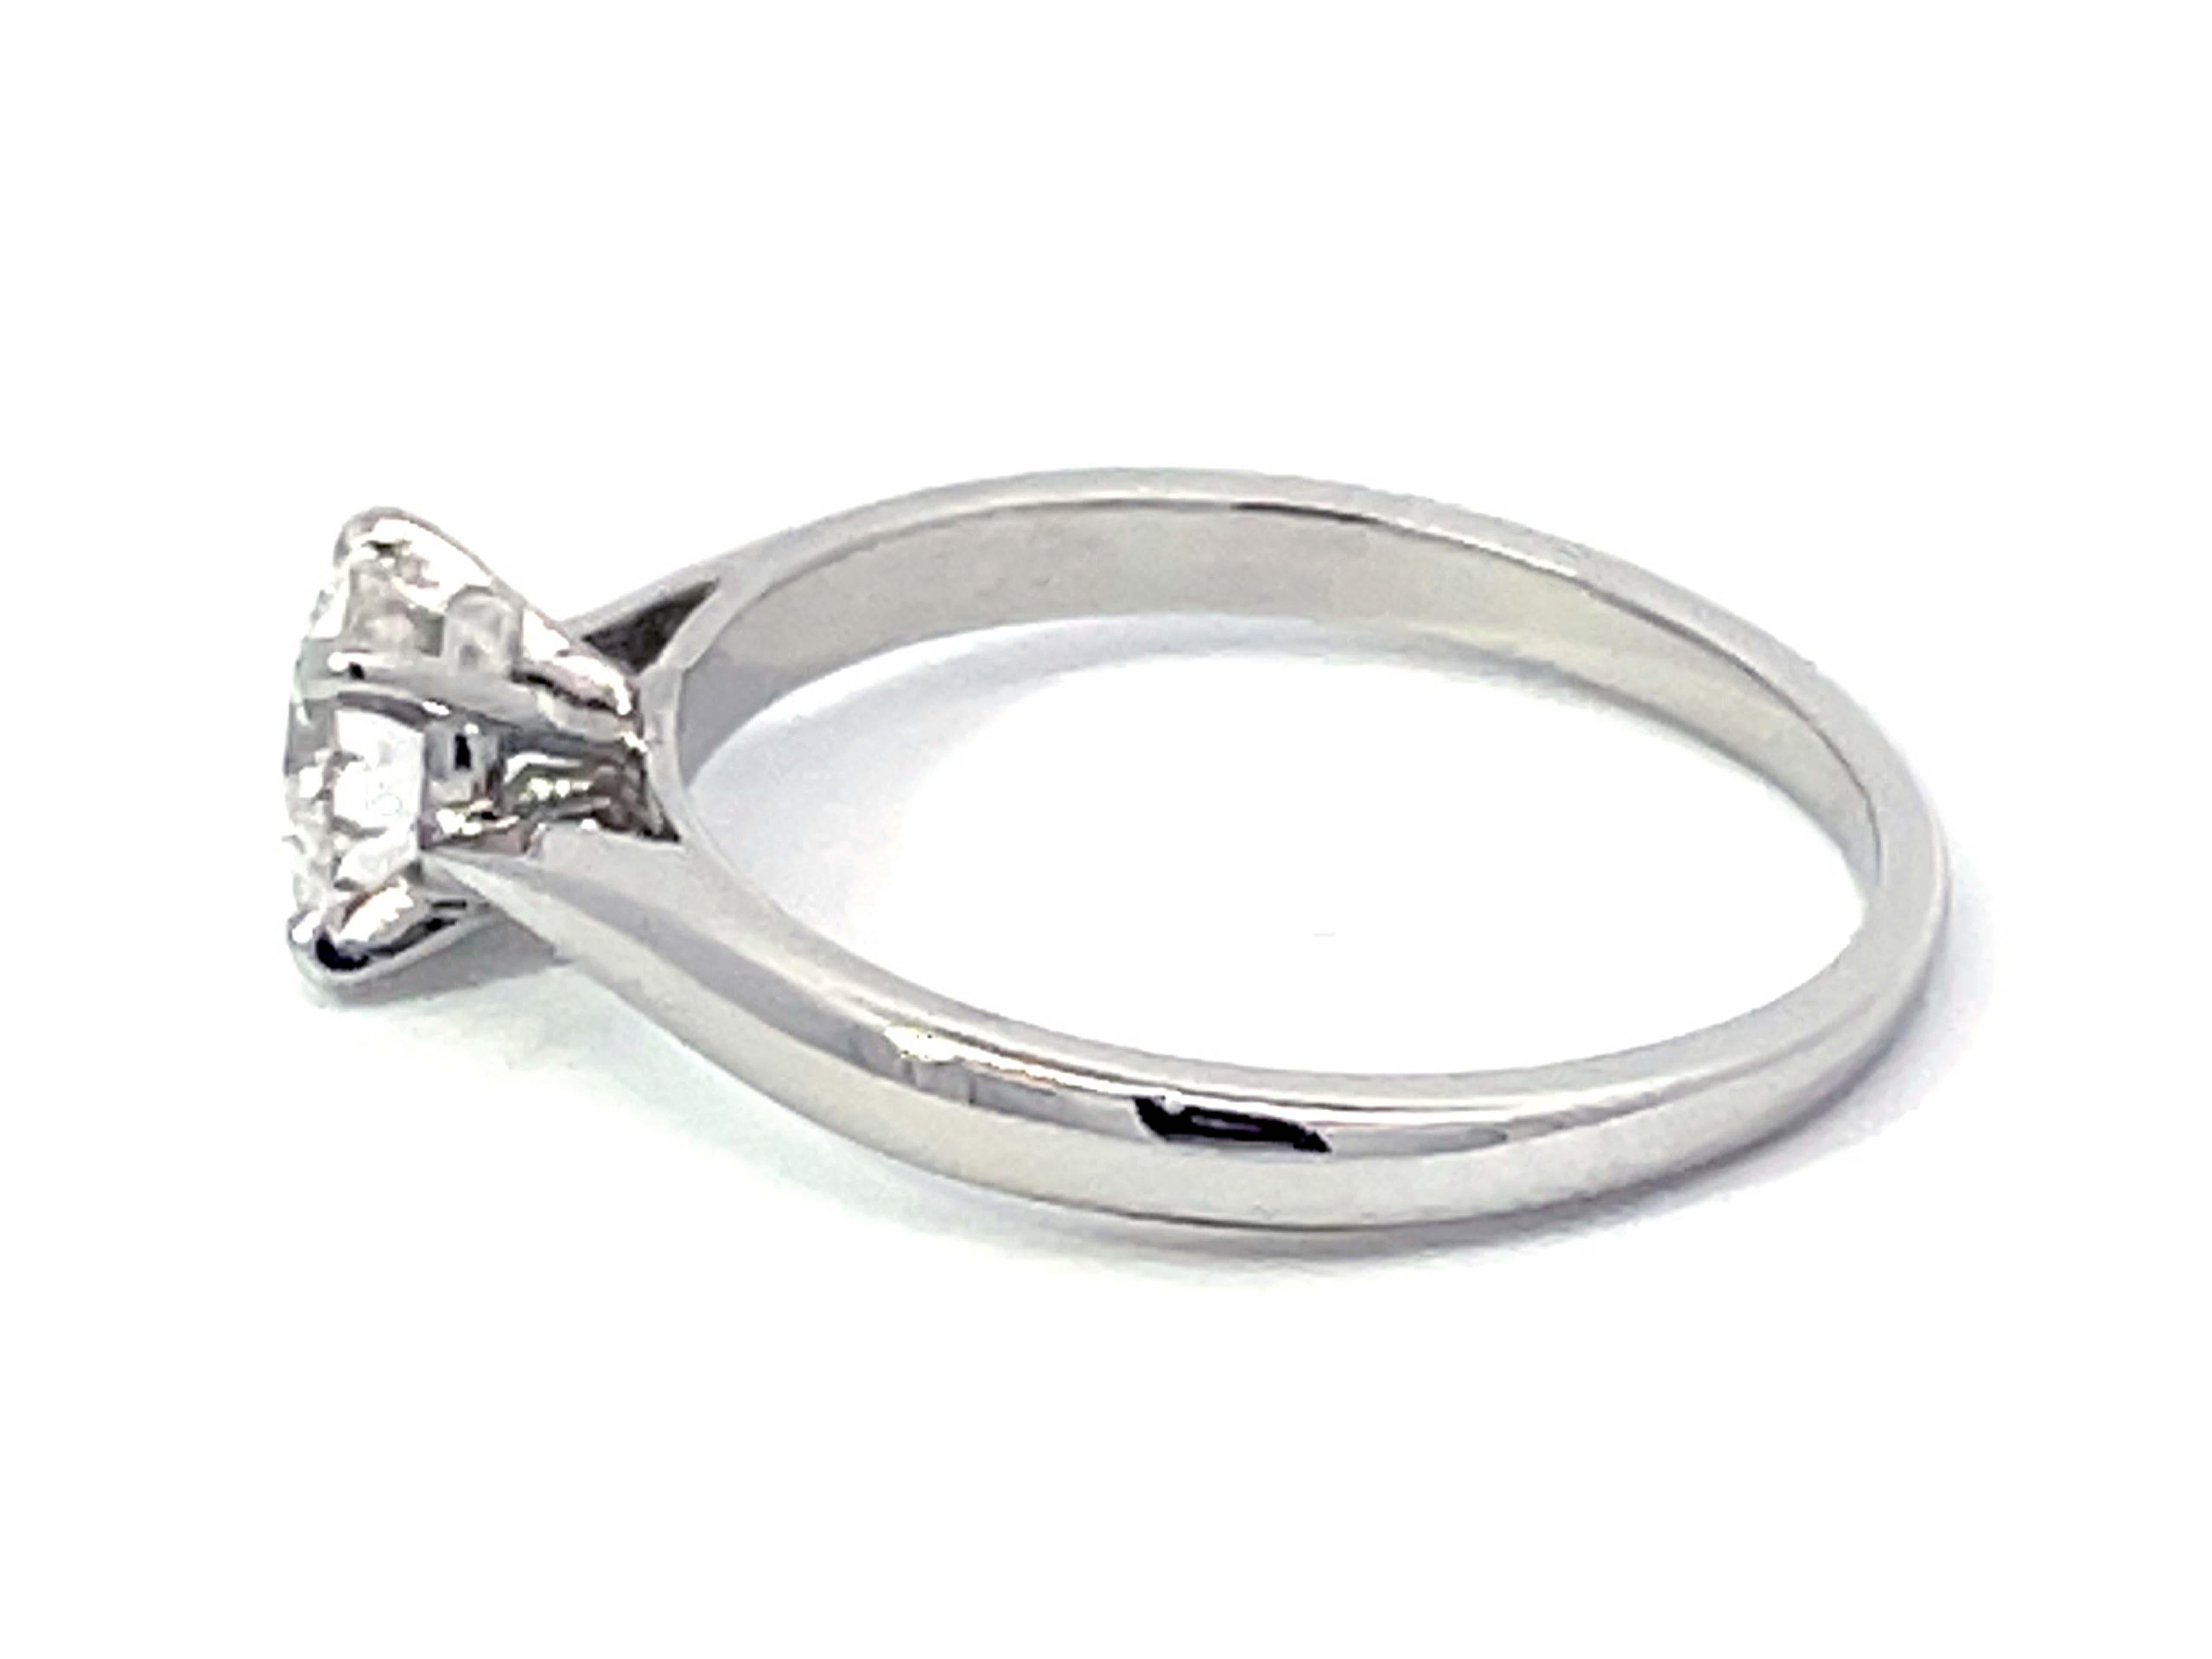 Cartier 1894 Solitaire Diamond Engagement Ring in Platinum, G VS2 For Sale 2